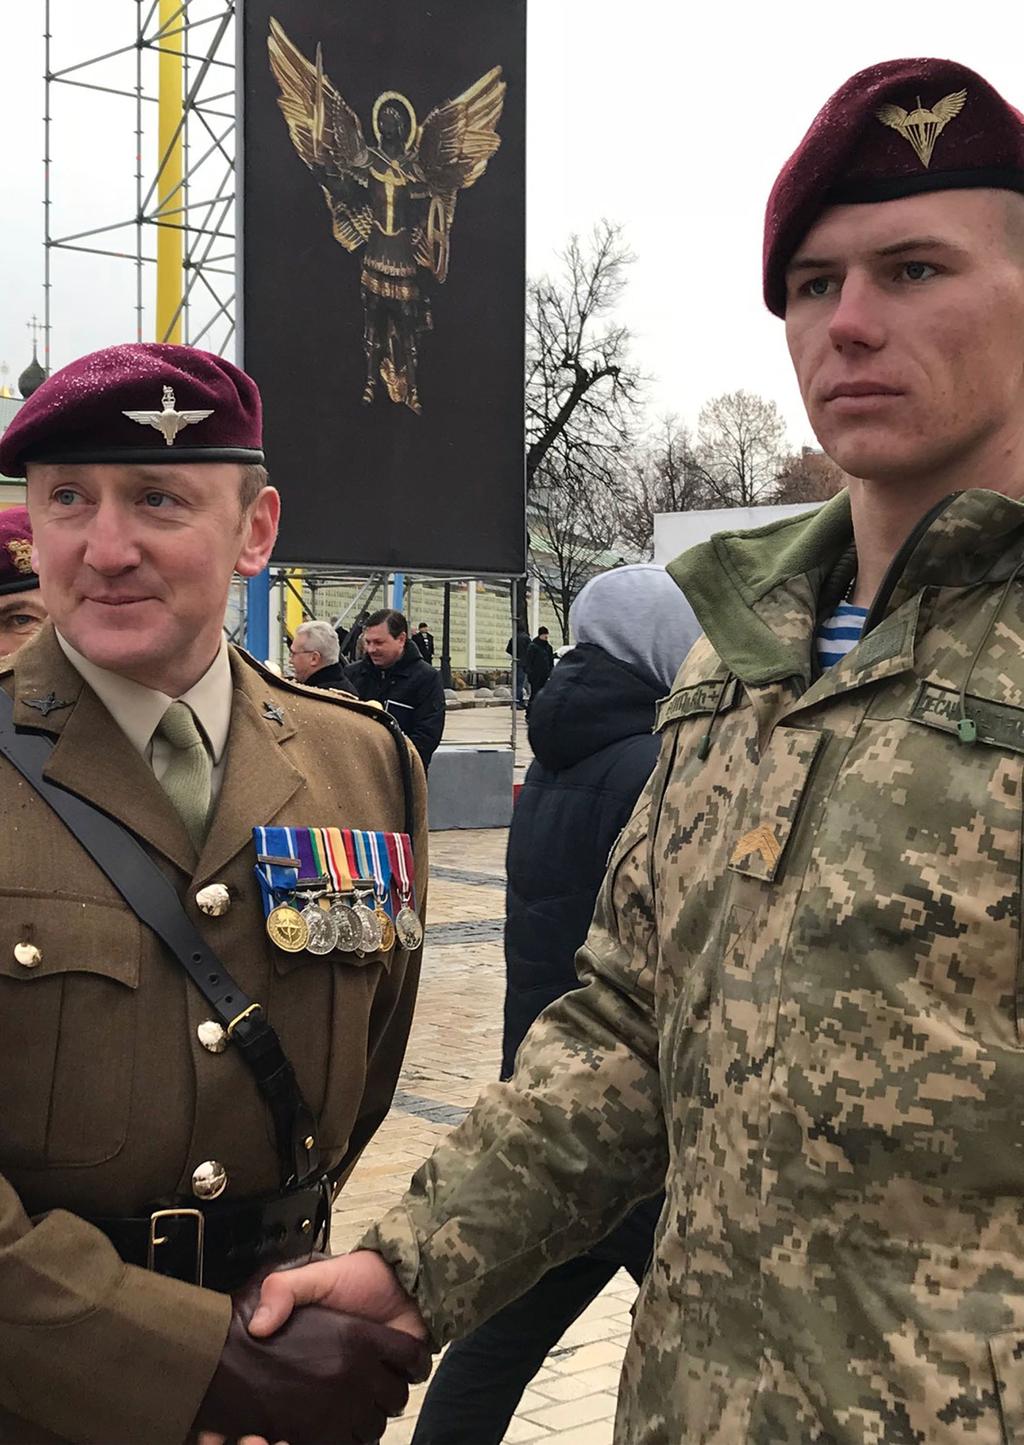 A British officer (left) and a Ukrainian paratrooper attend a special ceremony in Ukraine, 21 November 2017.